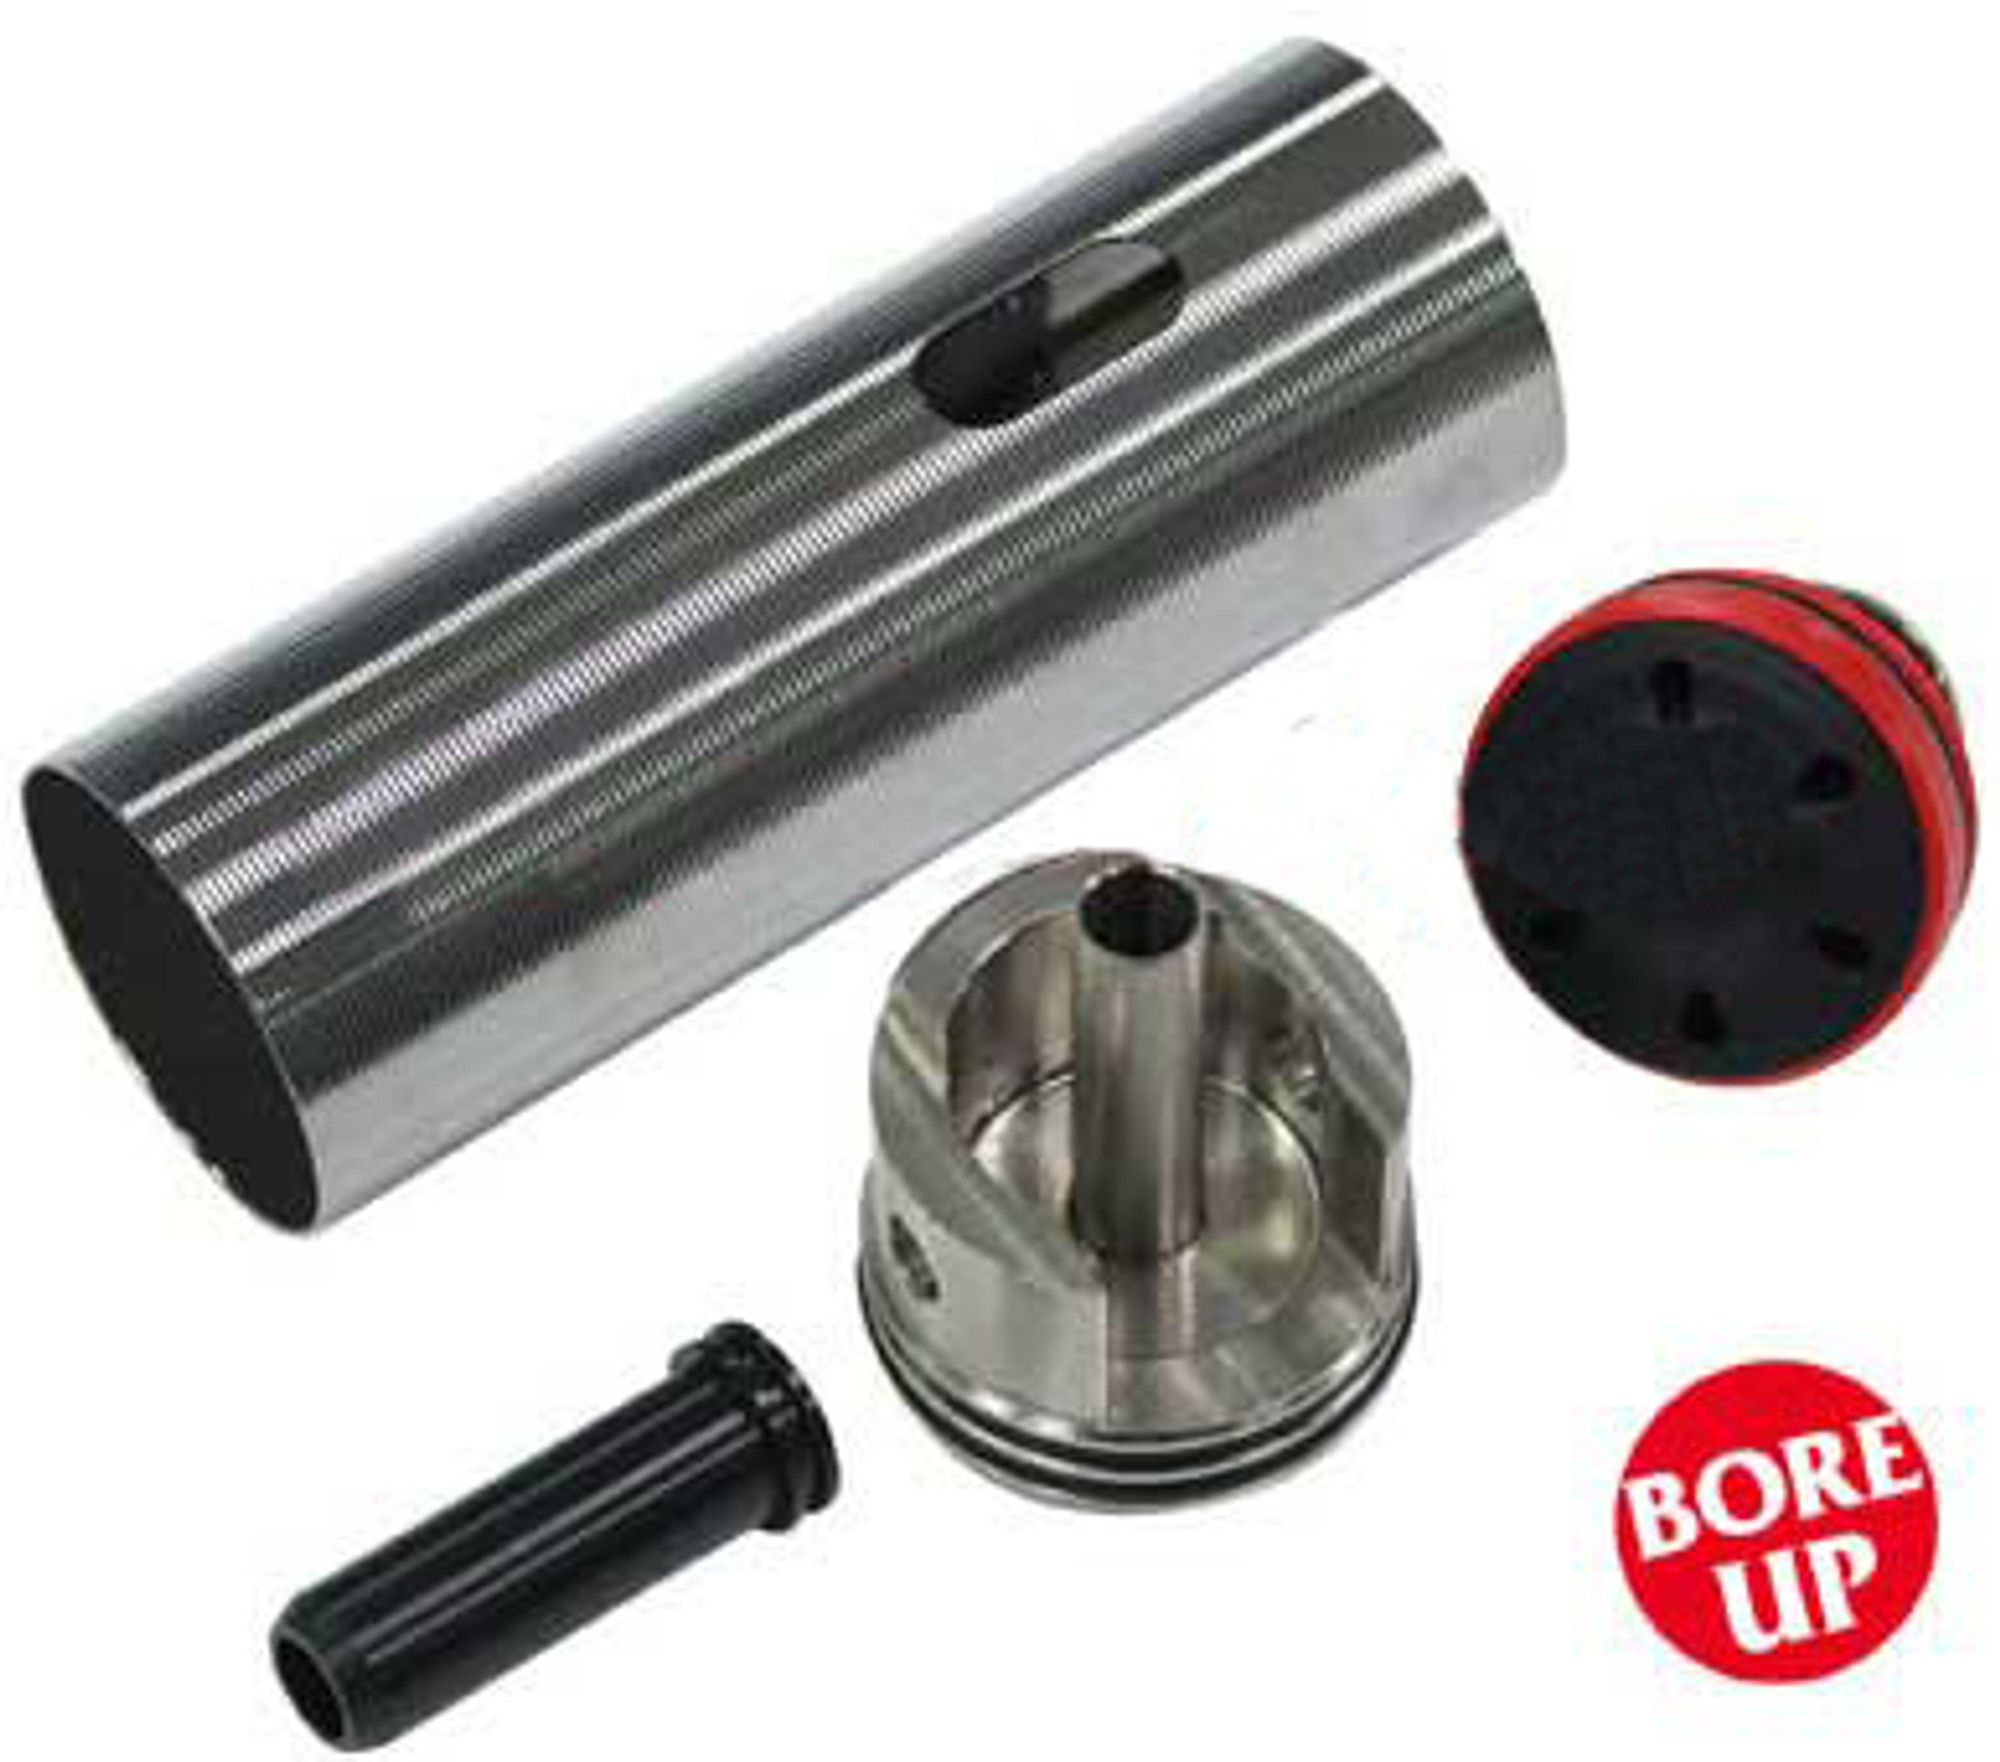 Guarder Bore-Up Cylinder Set for G36 Series Airsoft AEG